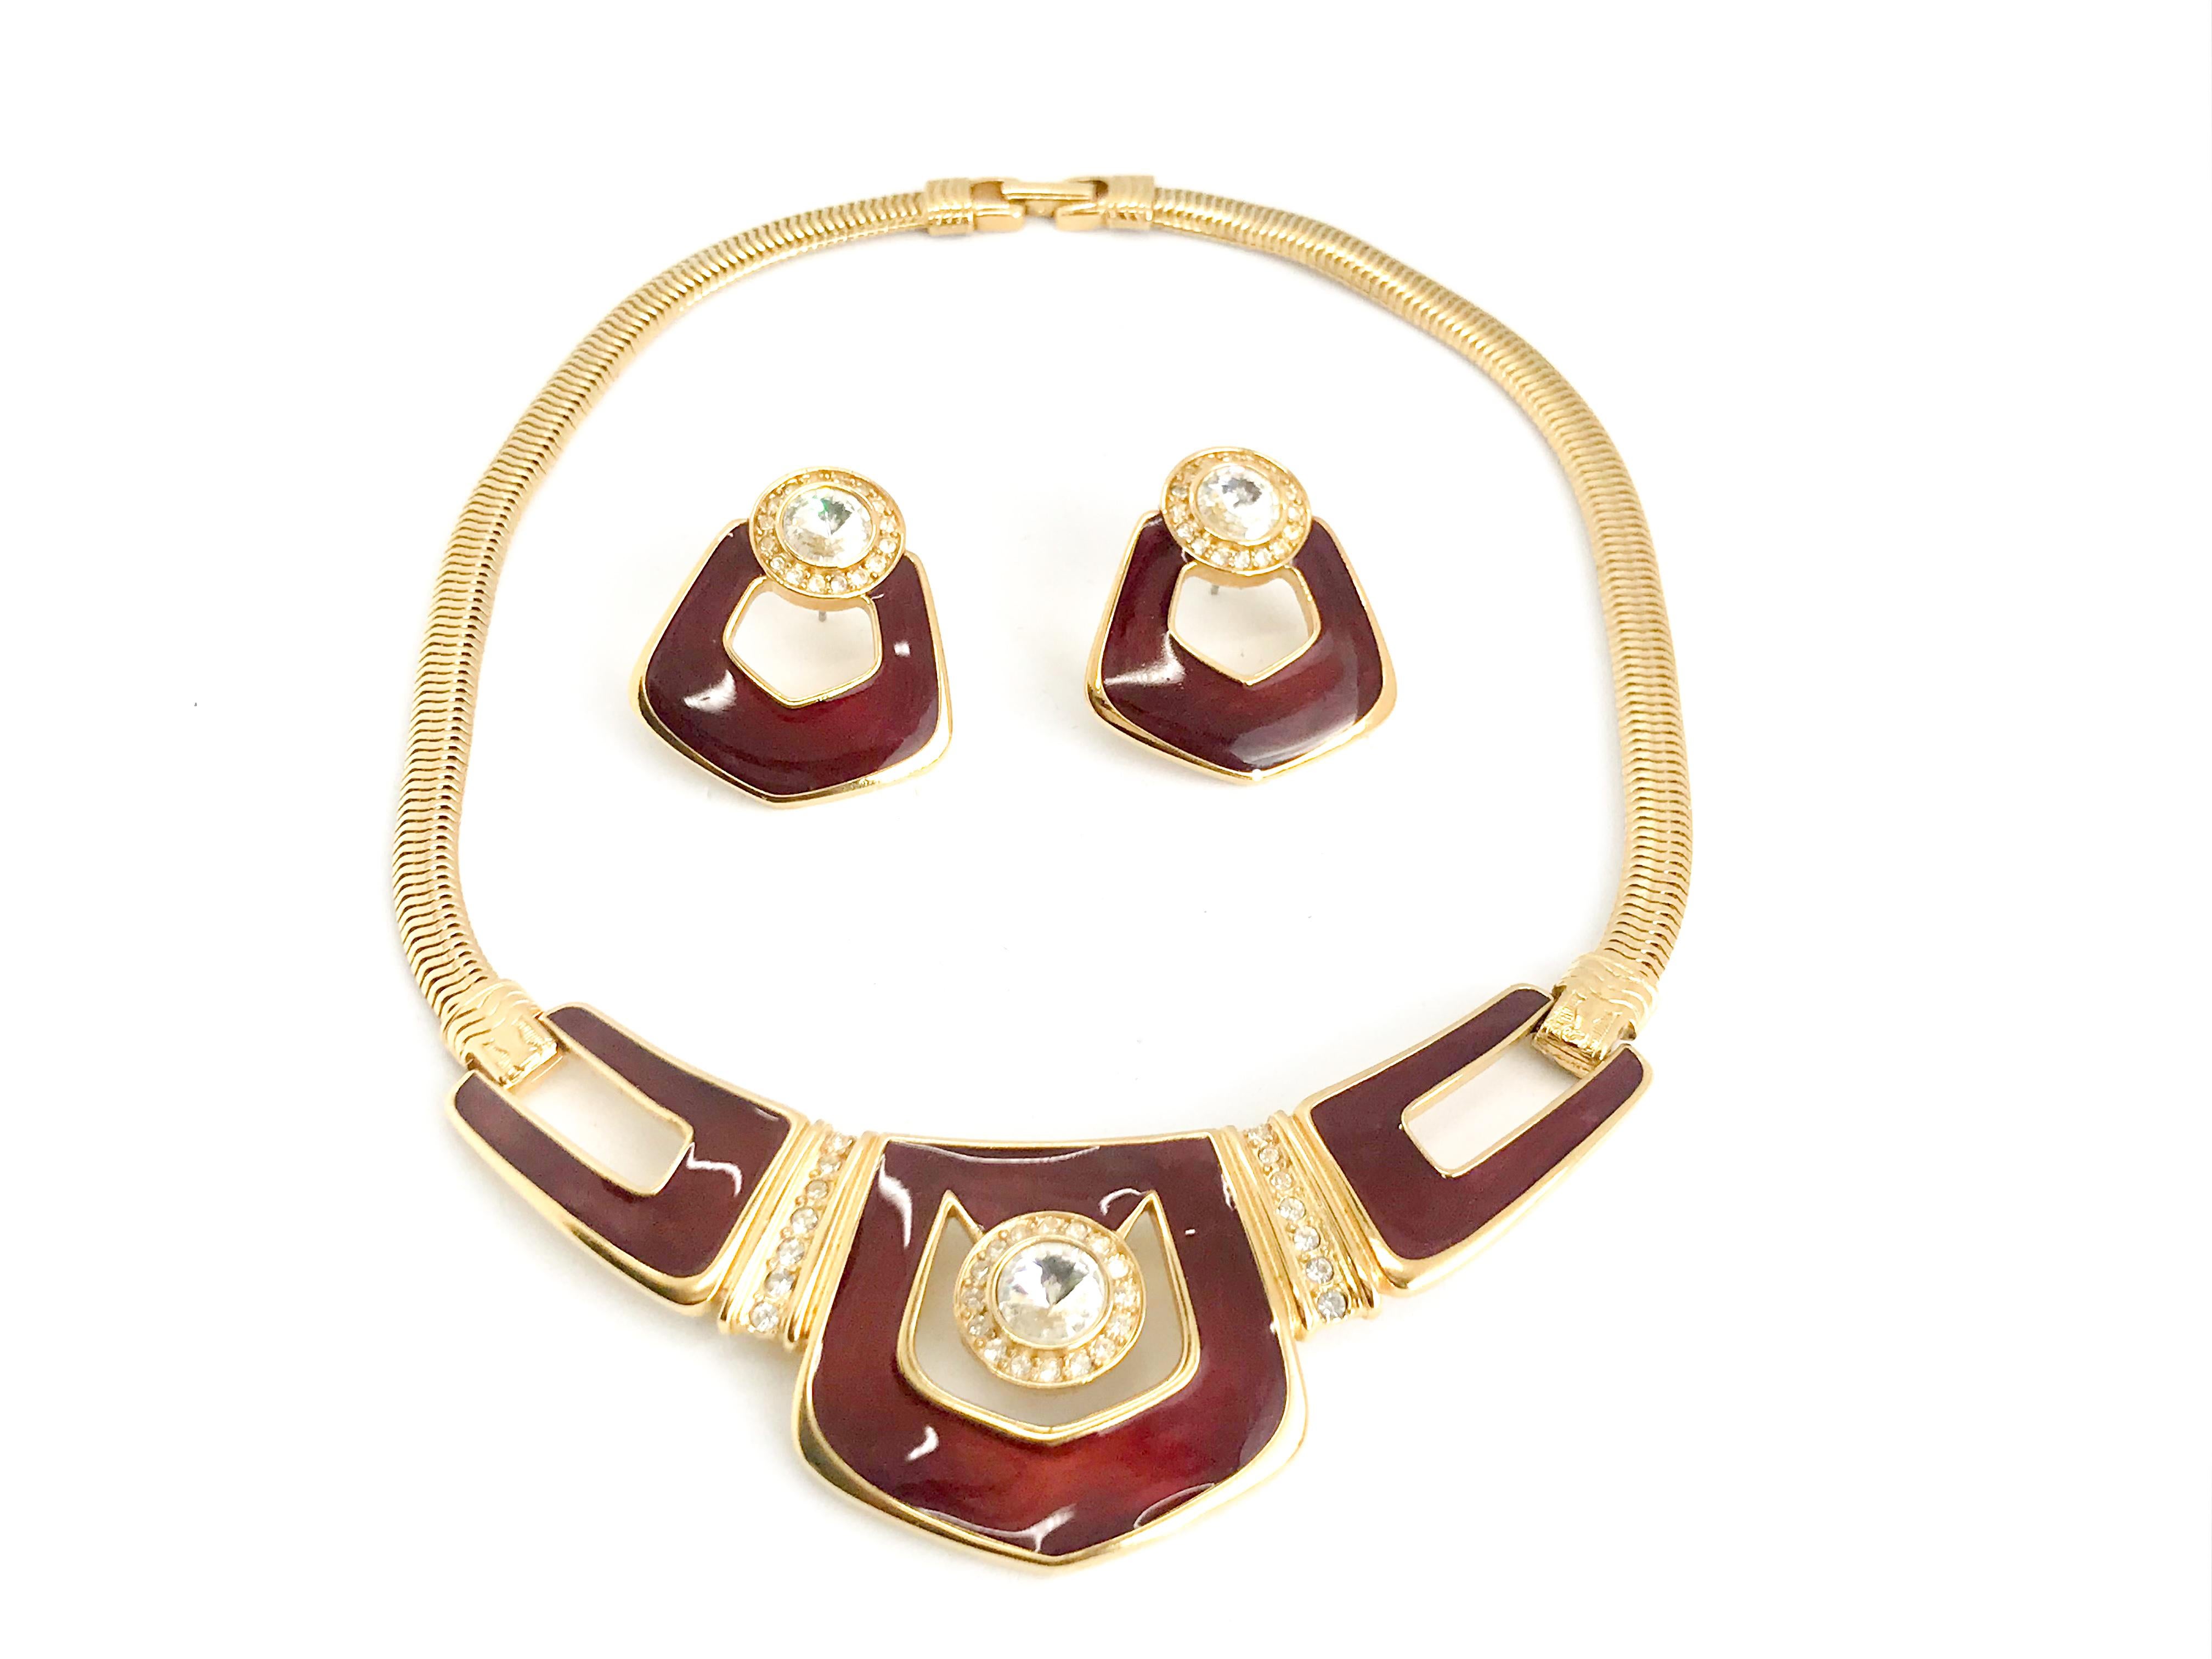 Bergdorf Goodman 1980s Vintage Necklace and Earrings set.

Eye-catching geometric bronze enamel and crystal set from legendary Manhattan department store Bergdorf Goodman. 

Necklace has a flat snake chain and a circumference of 15”.  The